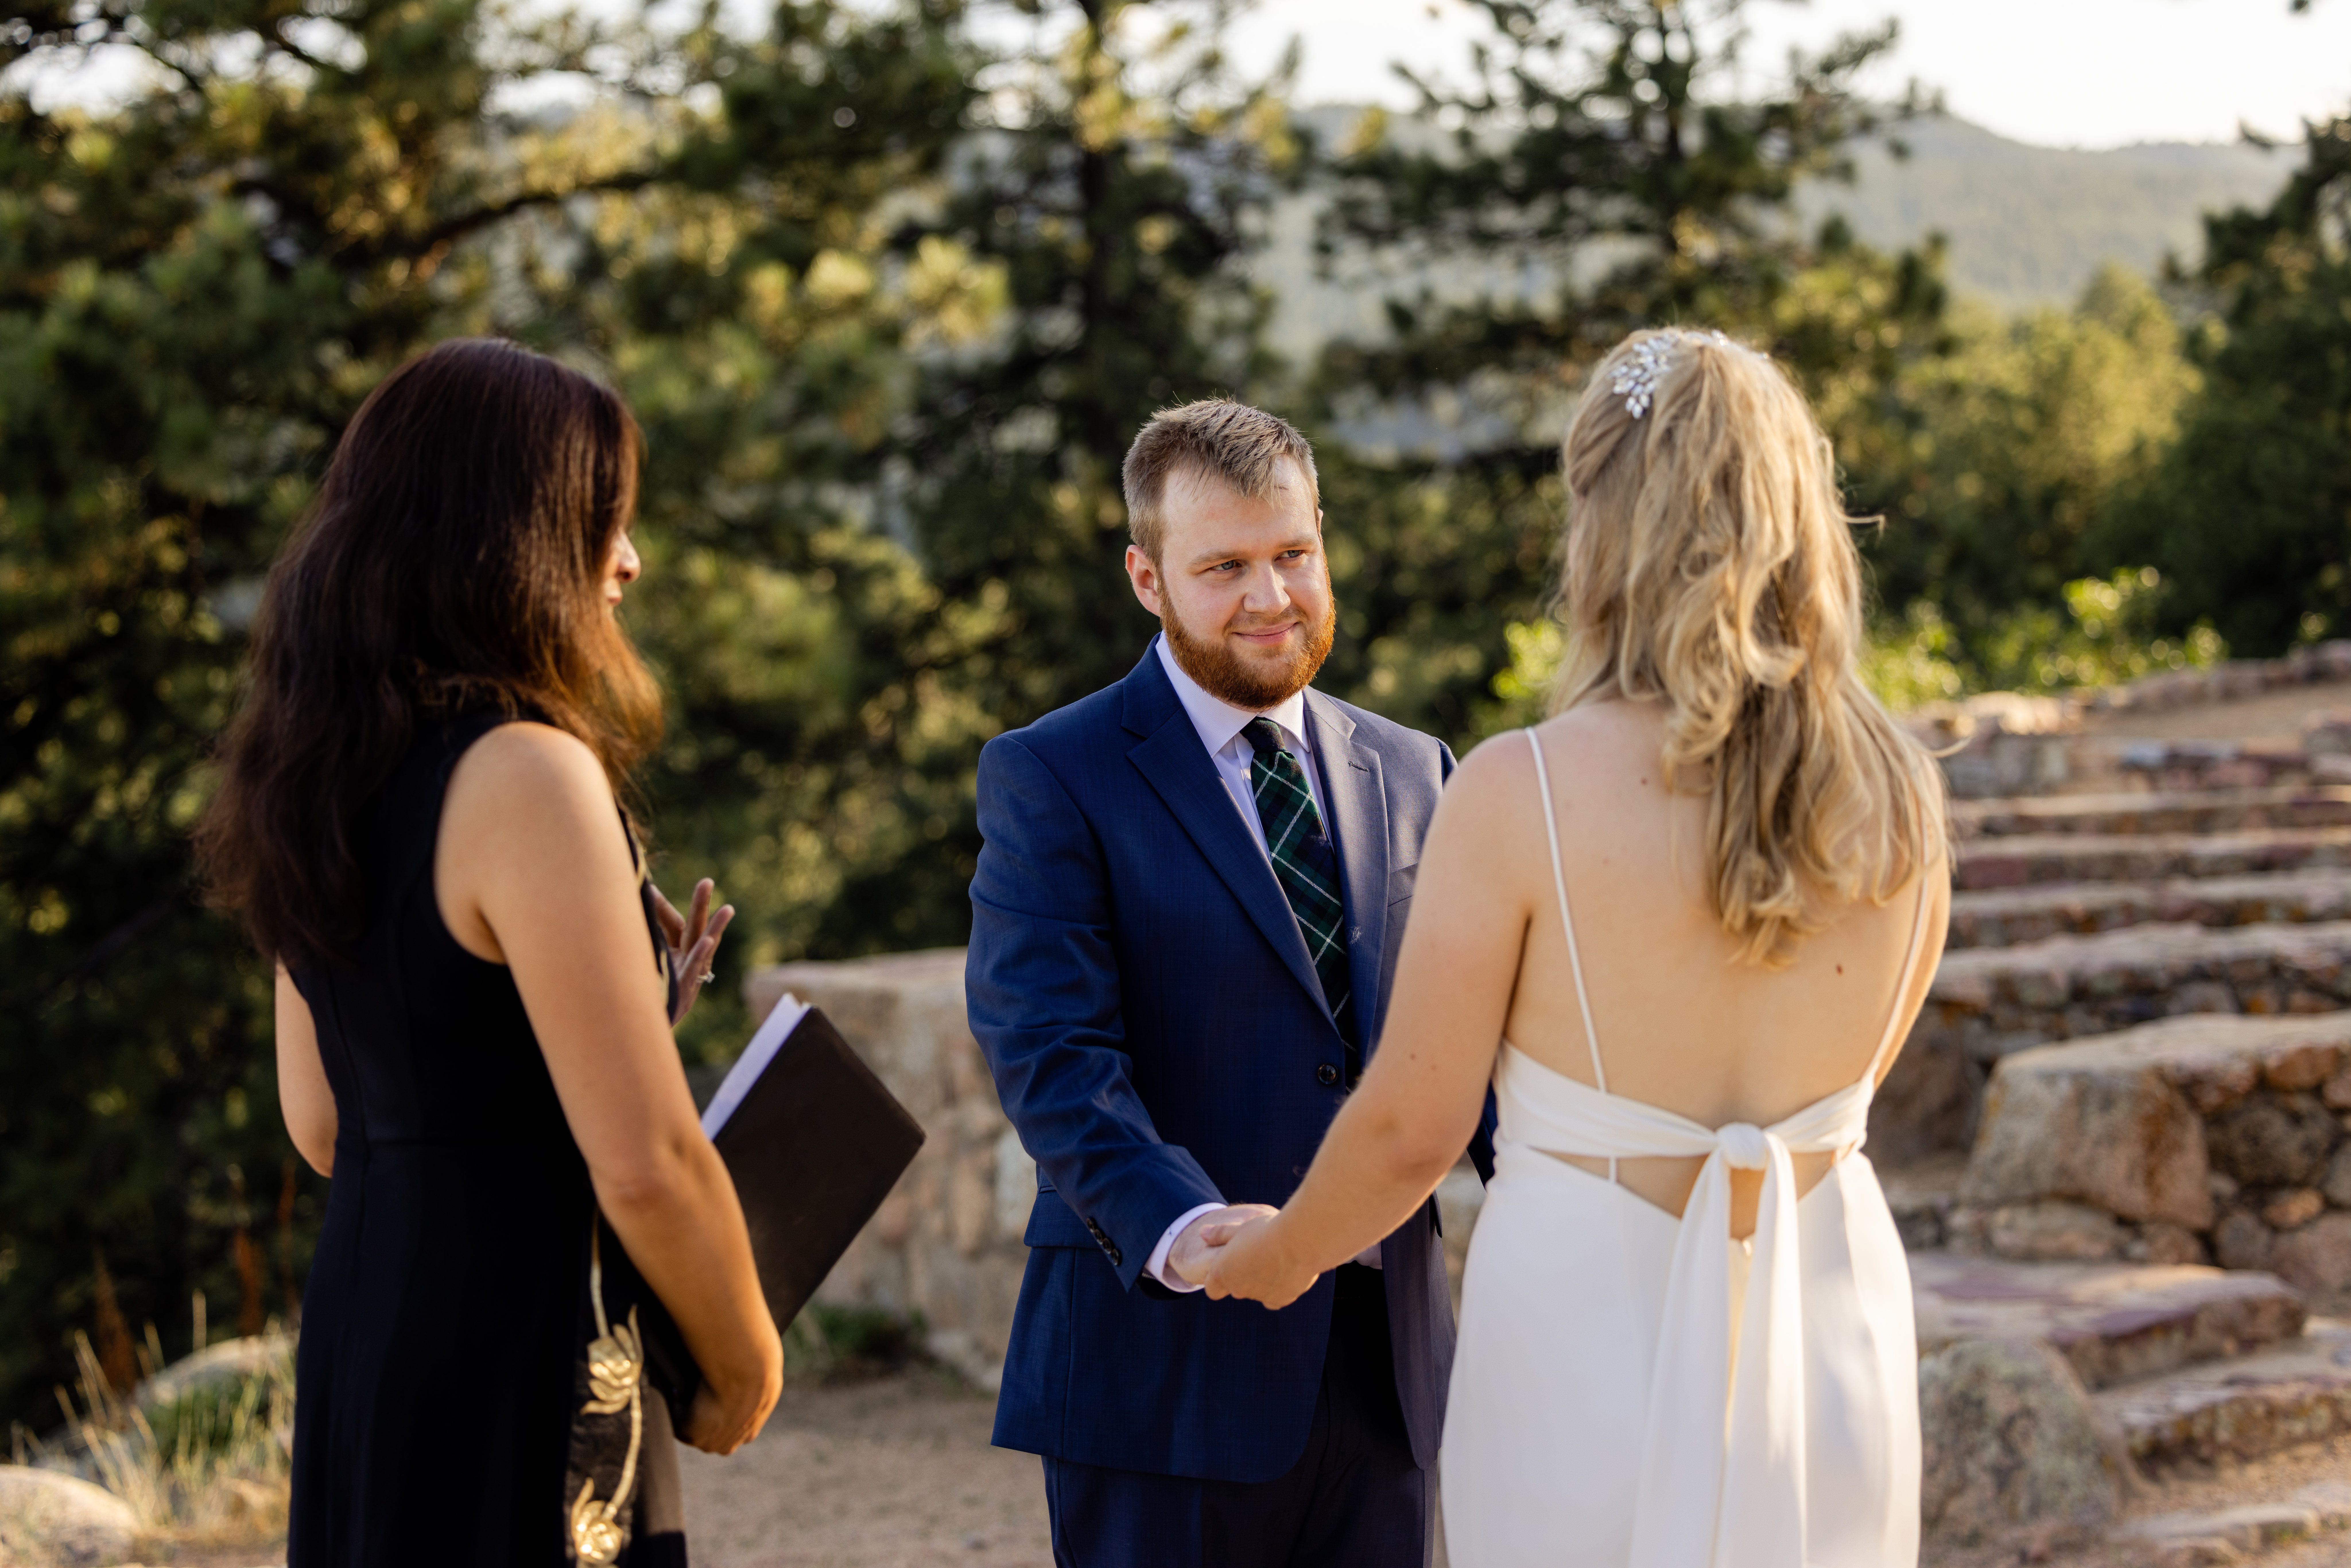 the groom looks at his beautiful bride during their ceremony for their Sunrise Amphitheater wedding.